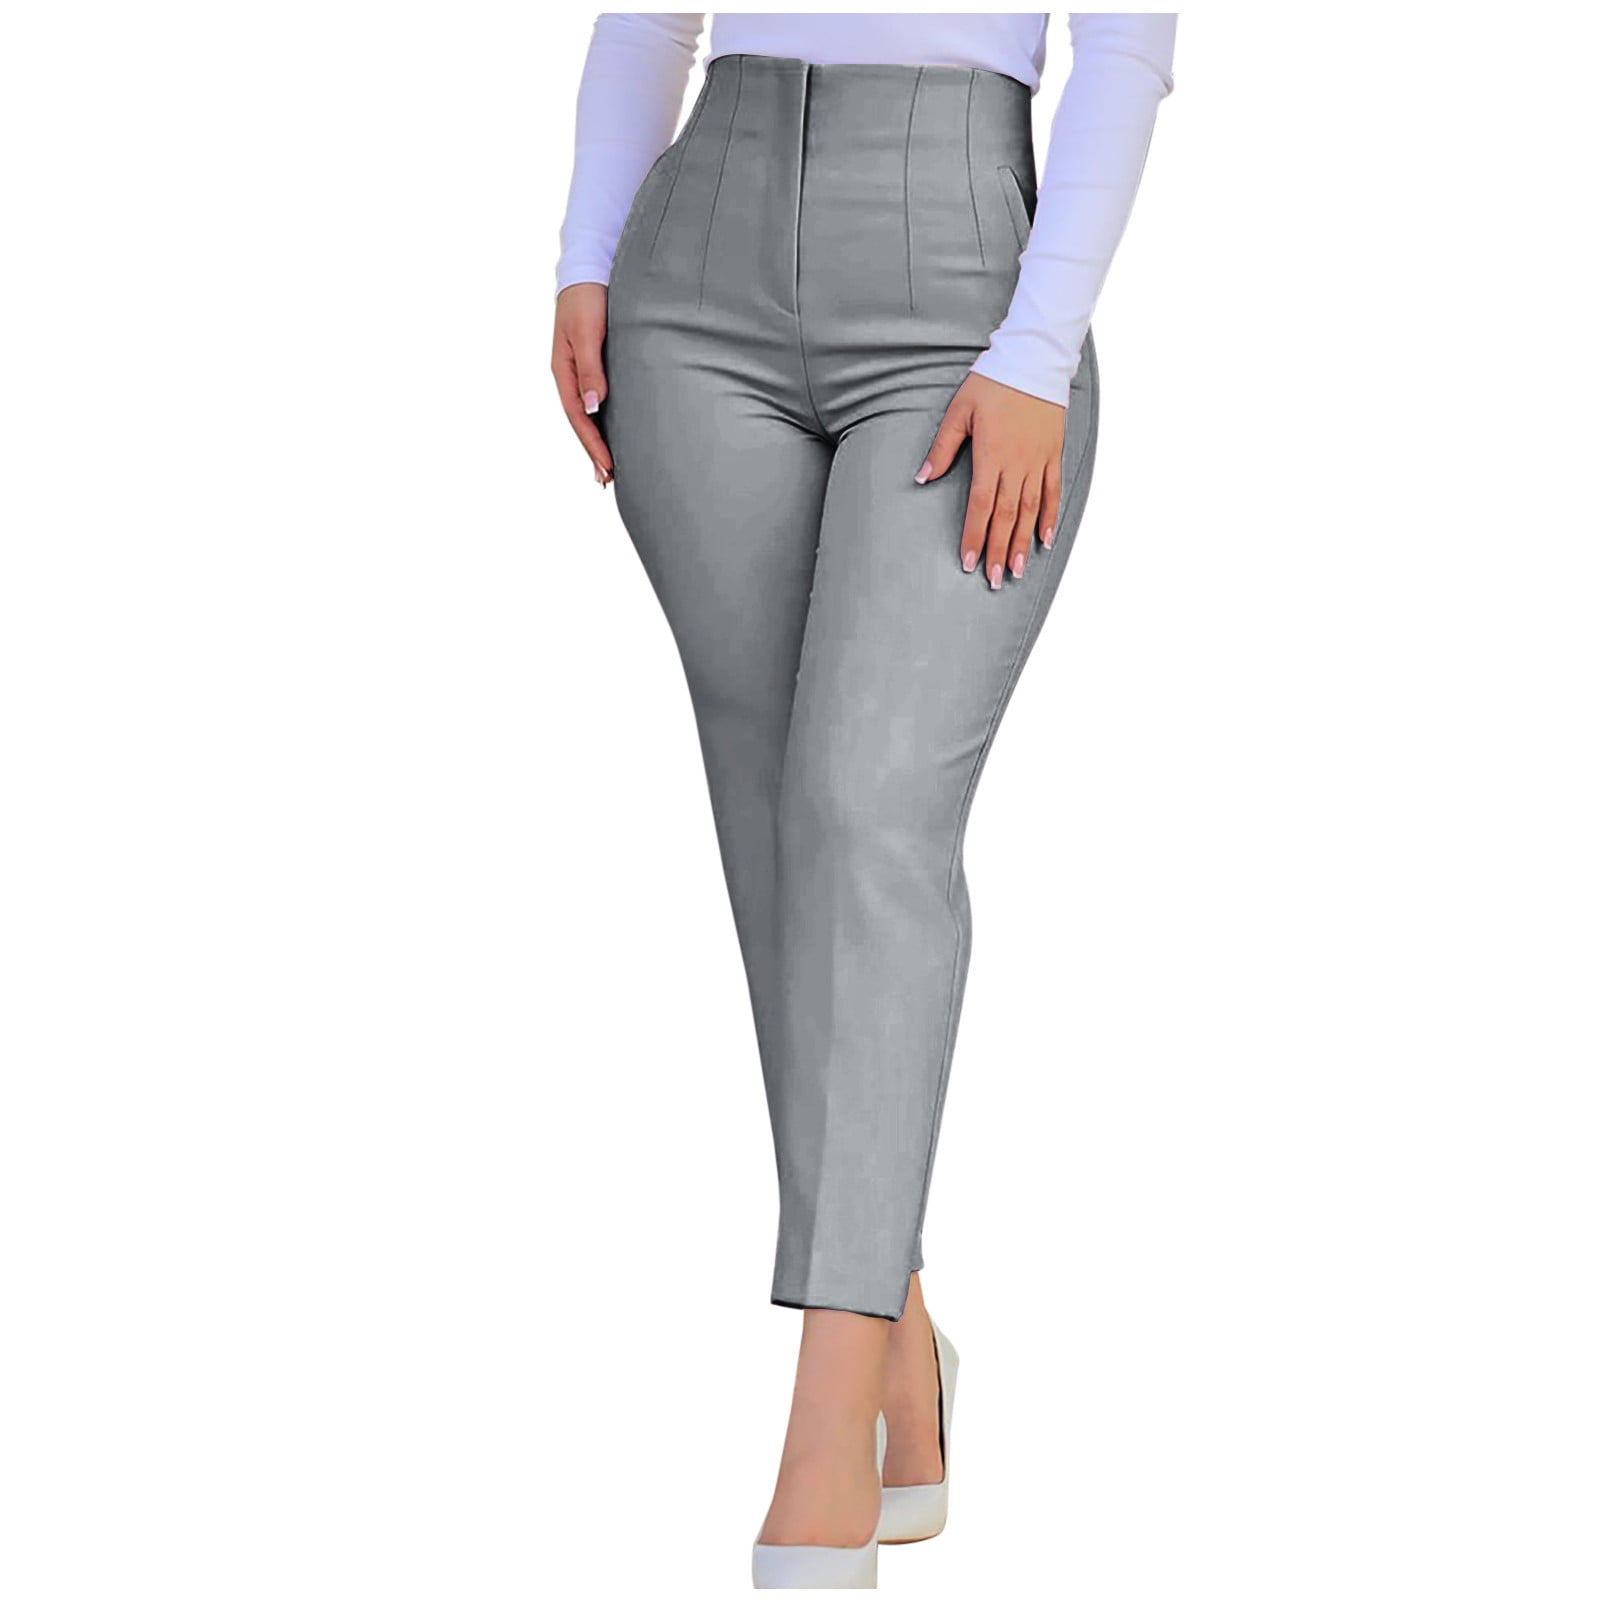 OGLCCG Dress Pants for Women High Waist Slim Fit Ankle Length Work Business  Trousers Comfy Office Dressy Pants with Pockets